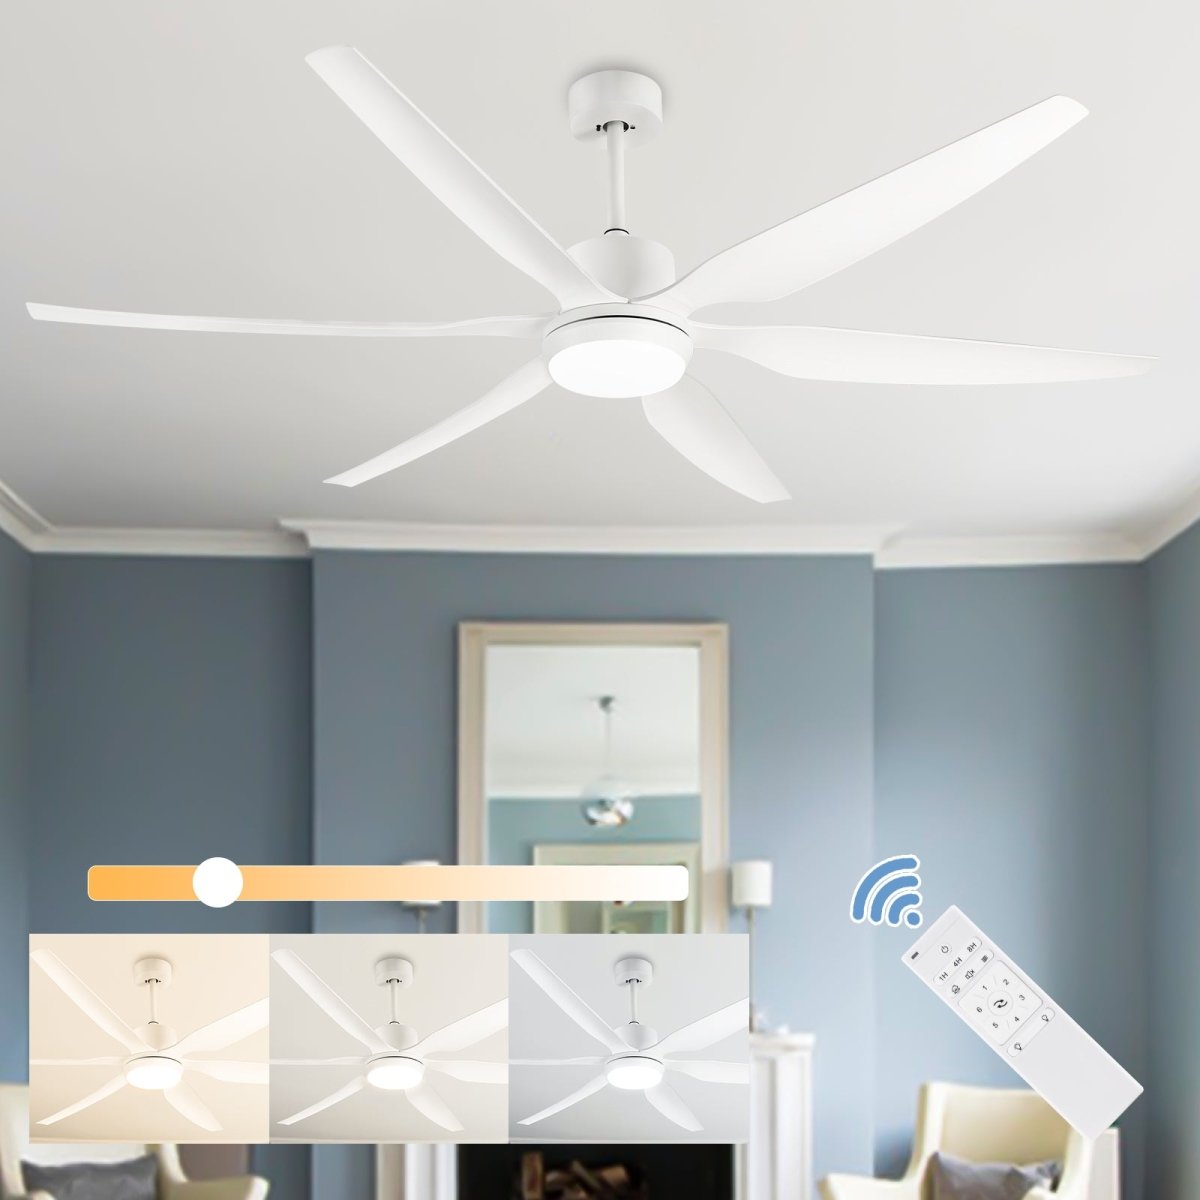 Depuley 66 Inch White Ceiling Fans with Lights Remote Control, 6 Blade Modern Ceiling Fan with Dimmble LED Lights, Indoor and Outdoor for Patio, Living Room, Bedroom, Office, Reversible Quiet DC Motor - WS-FPZ32-12B-WH 2 | DEPULEY